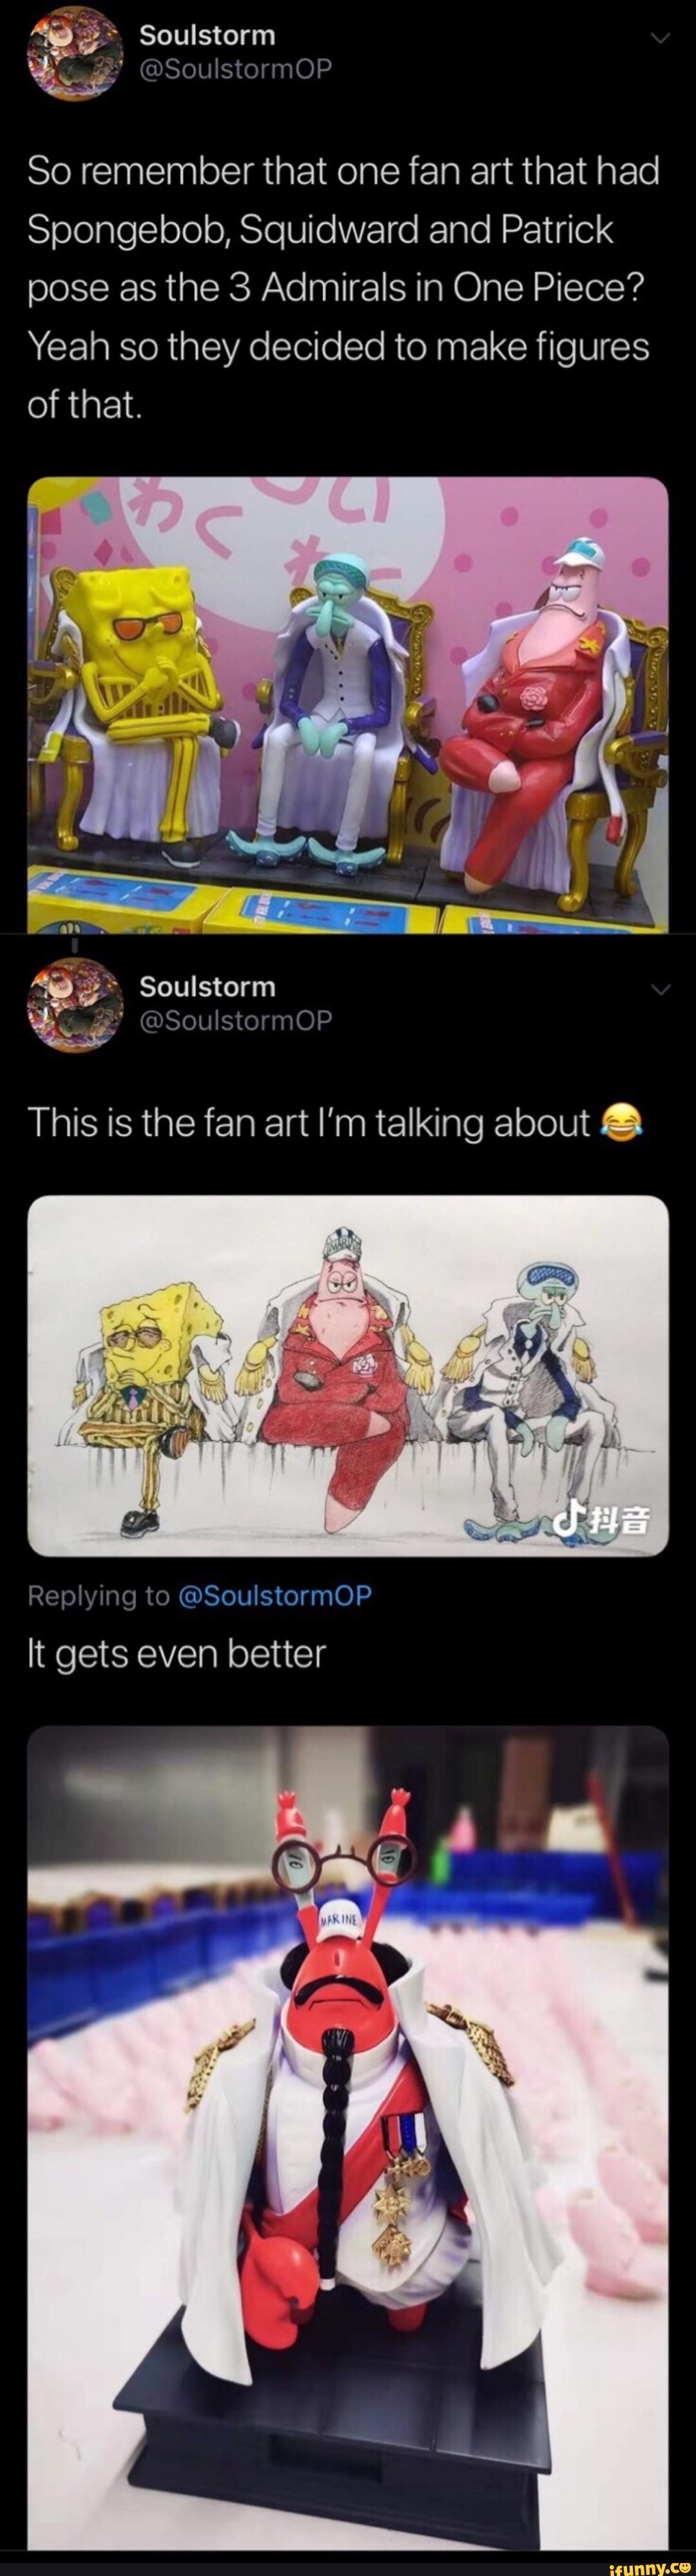 So Remember That One Fan Art That Had Spongebob Squidward And Patrick Pose As The 3 Admirals In One Piece Yeah So They Decided To Make Figures Of That This Is The